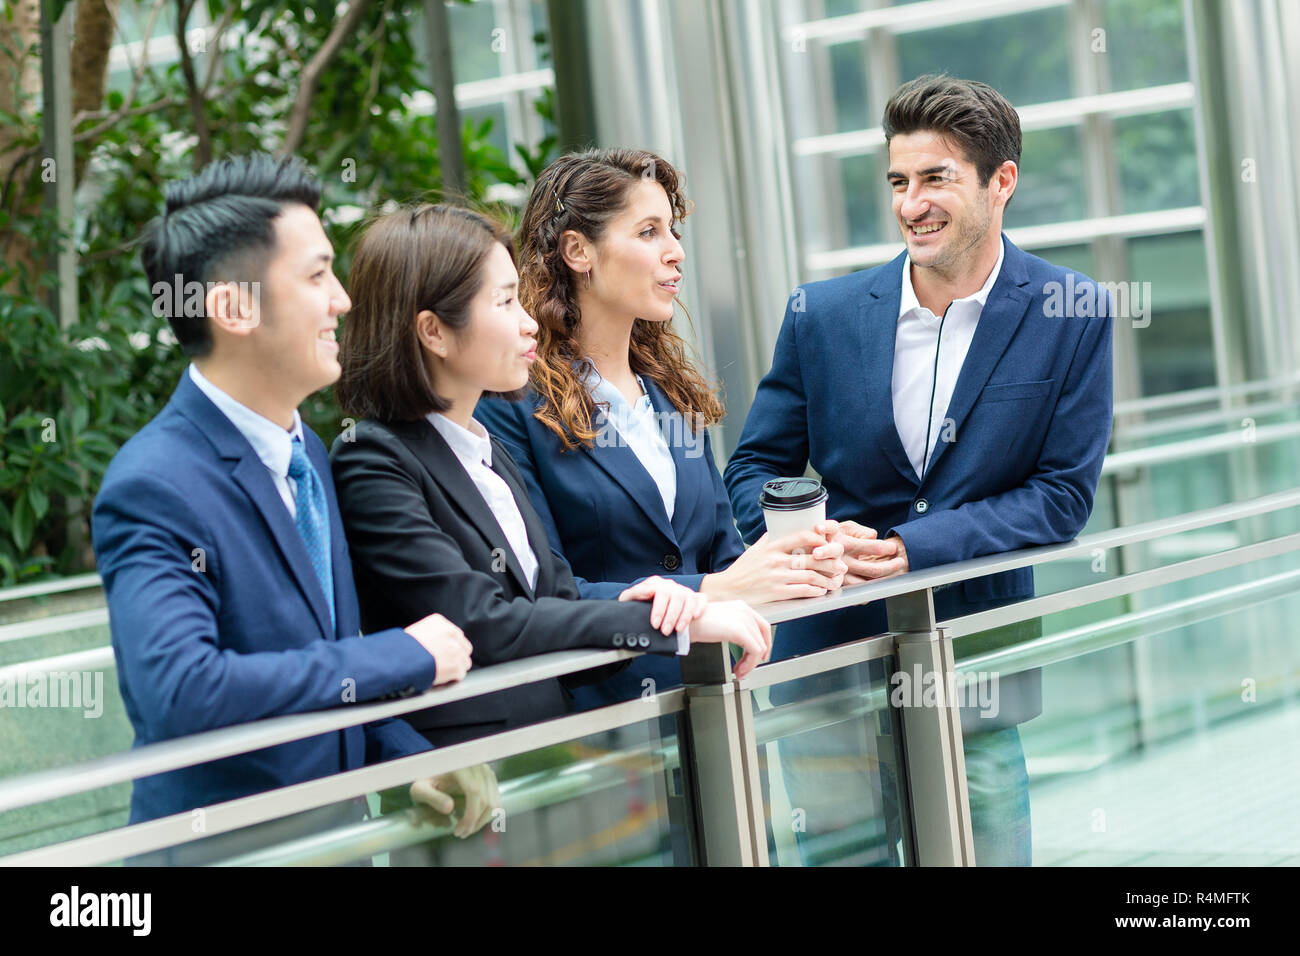 Business people discuss together Stock Photo